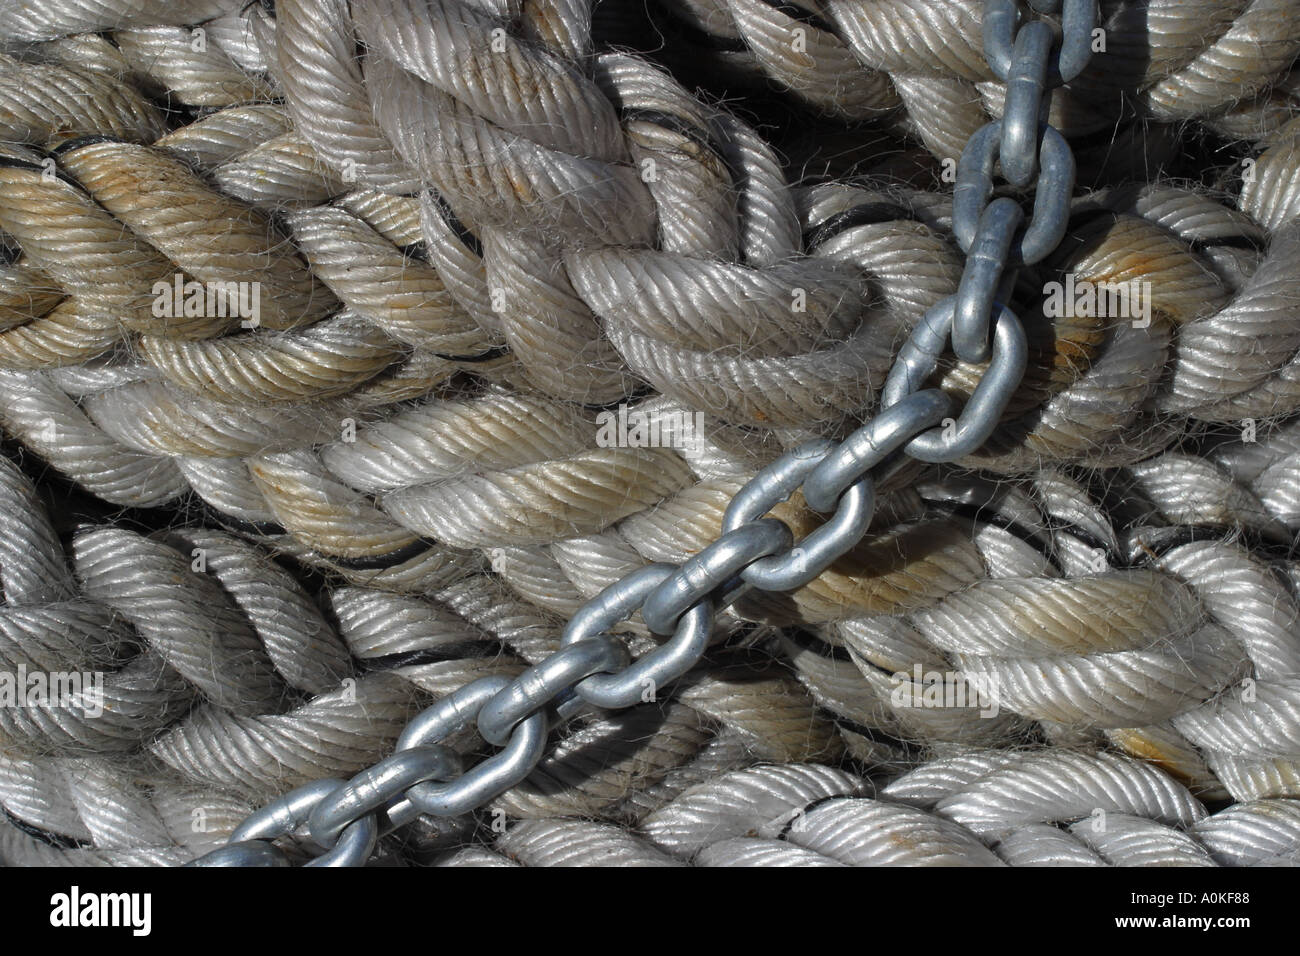 Coiled rope with a metal chain Stock Photo